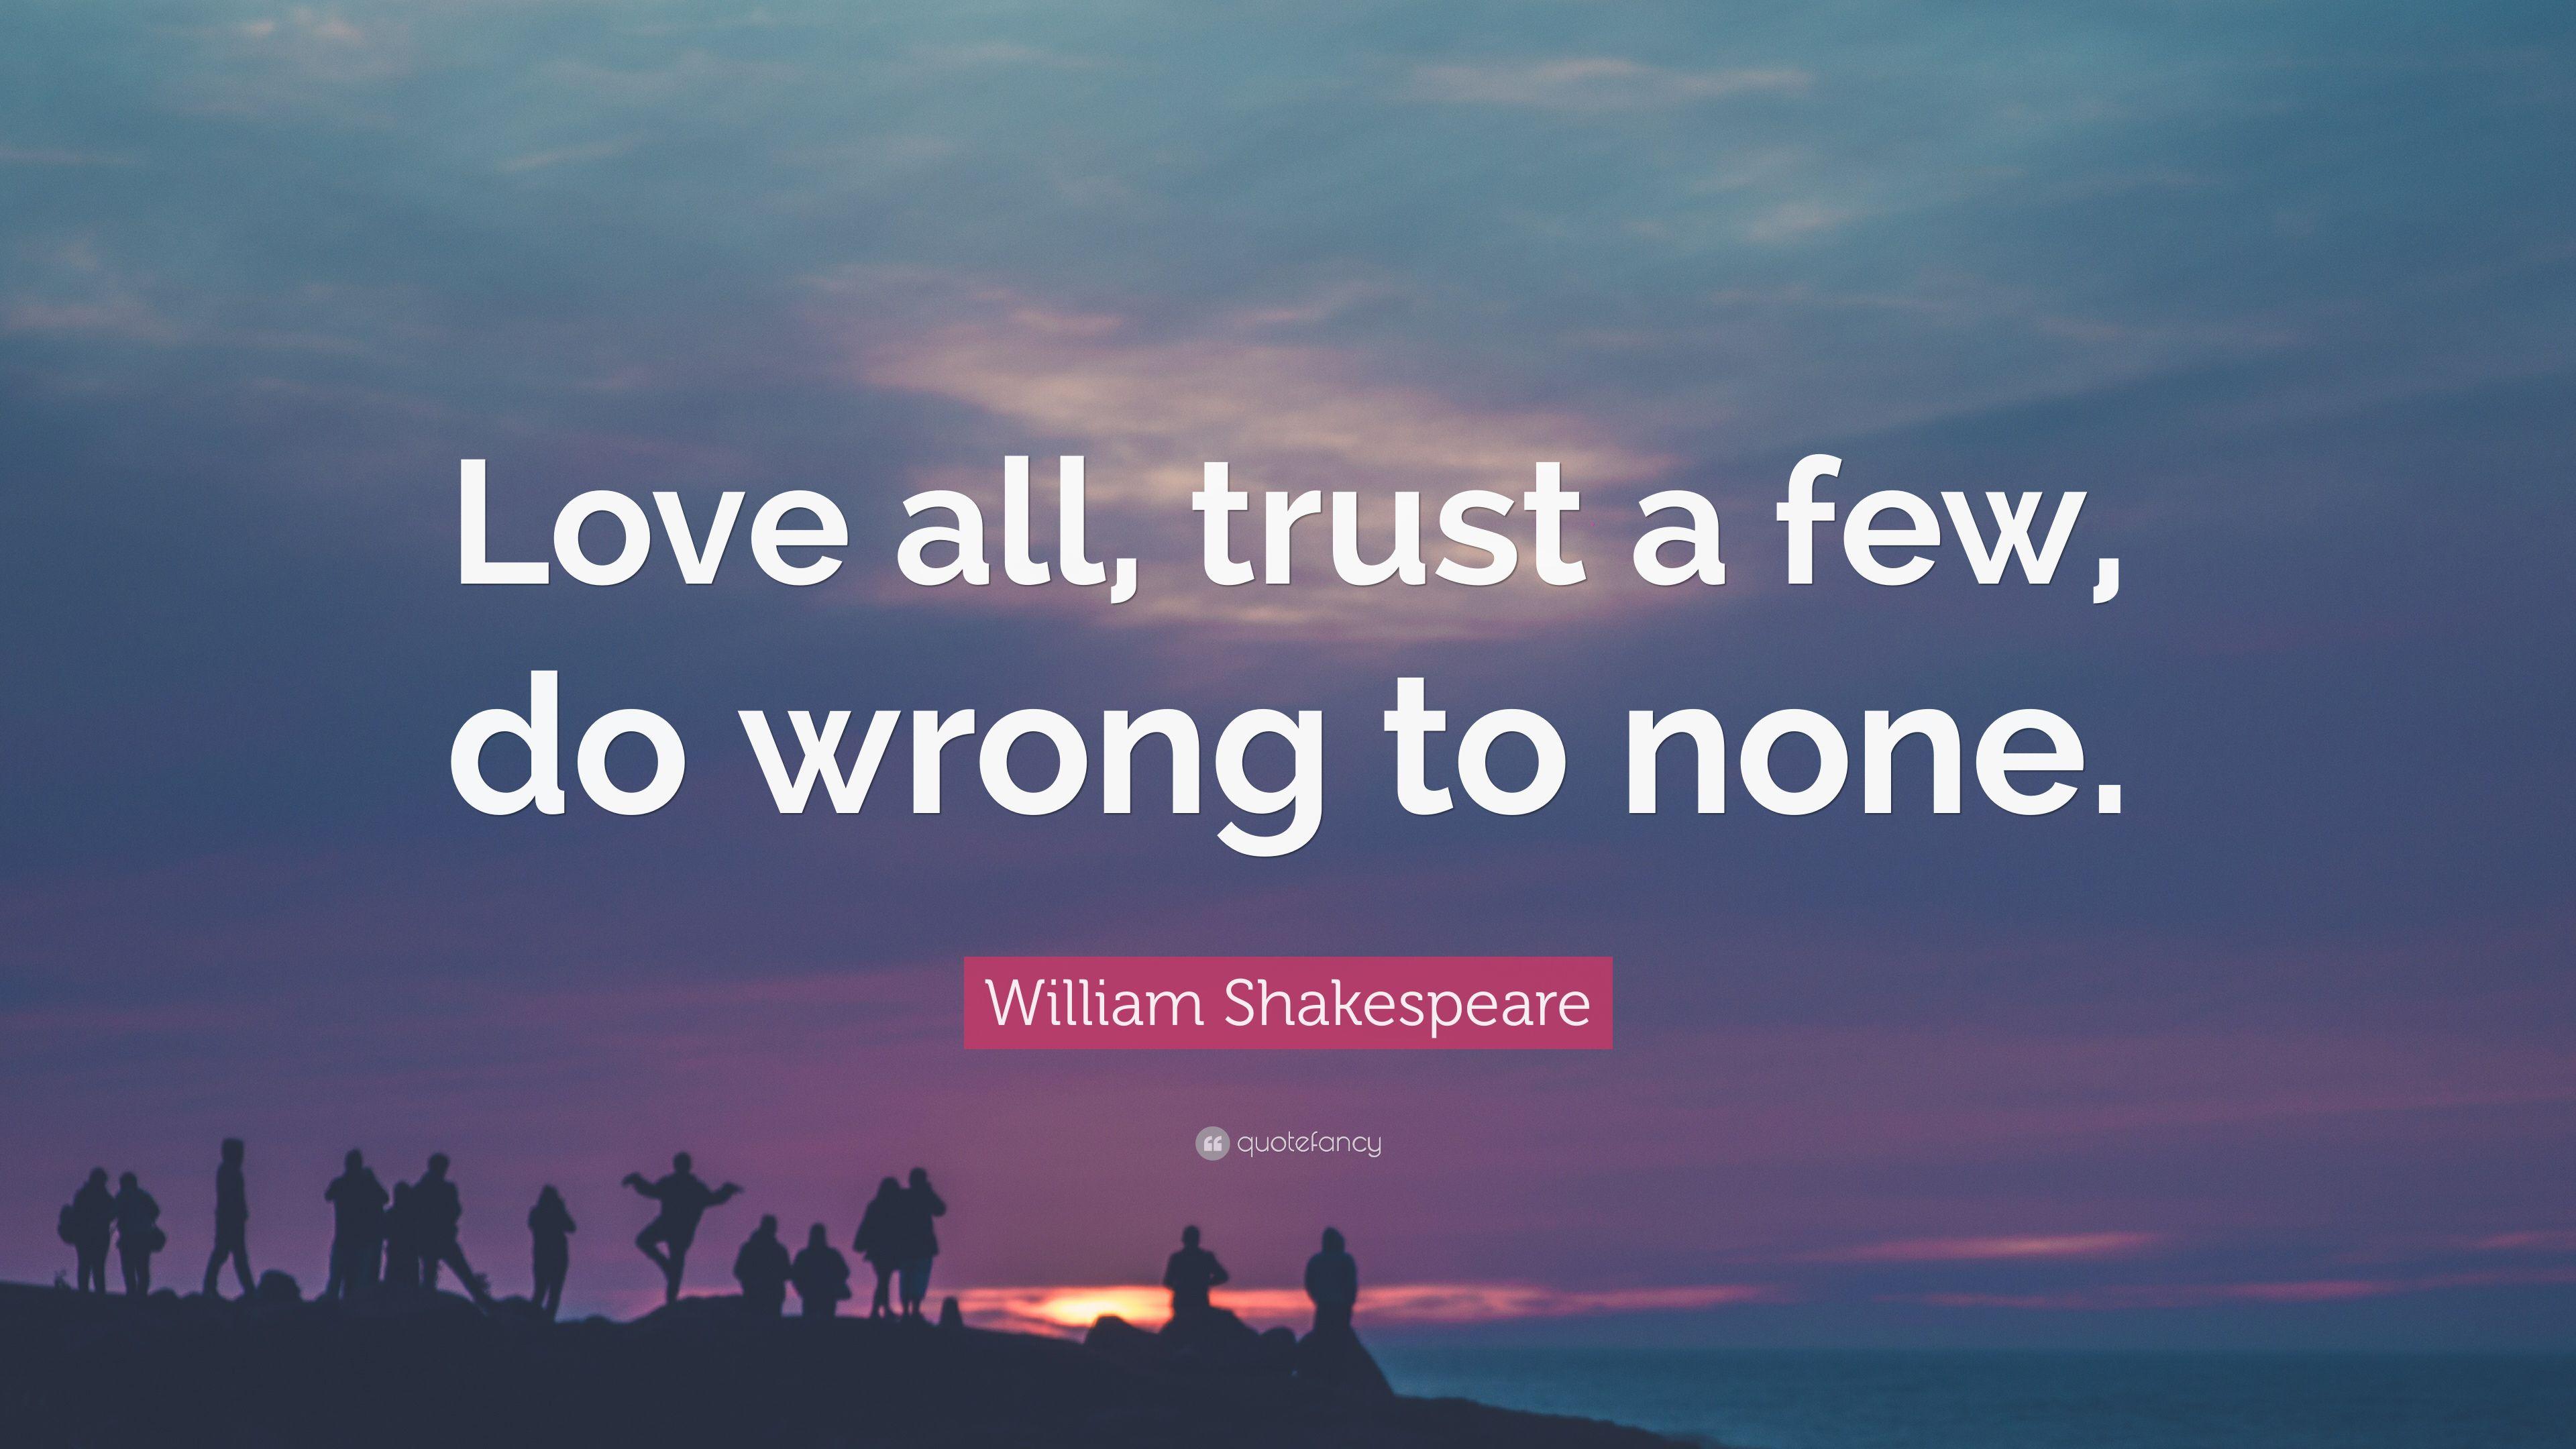 William Shakespeare Quote: “Love all, trust a few, do wrong to